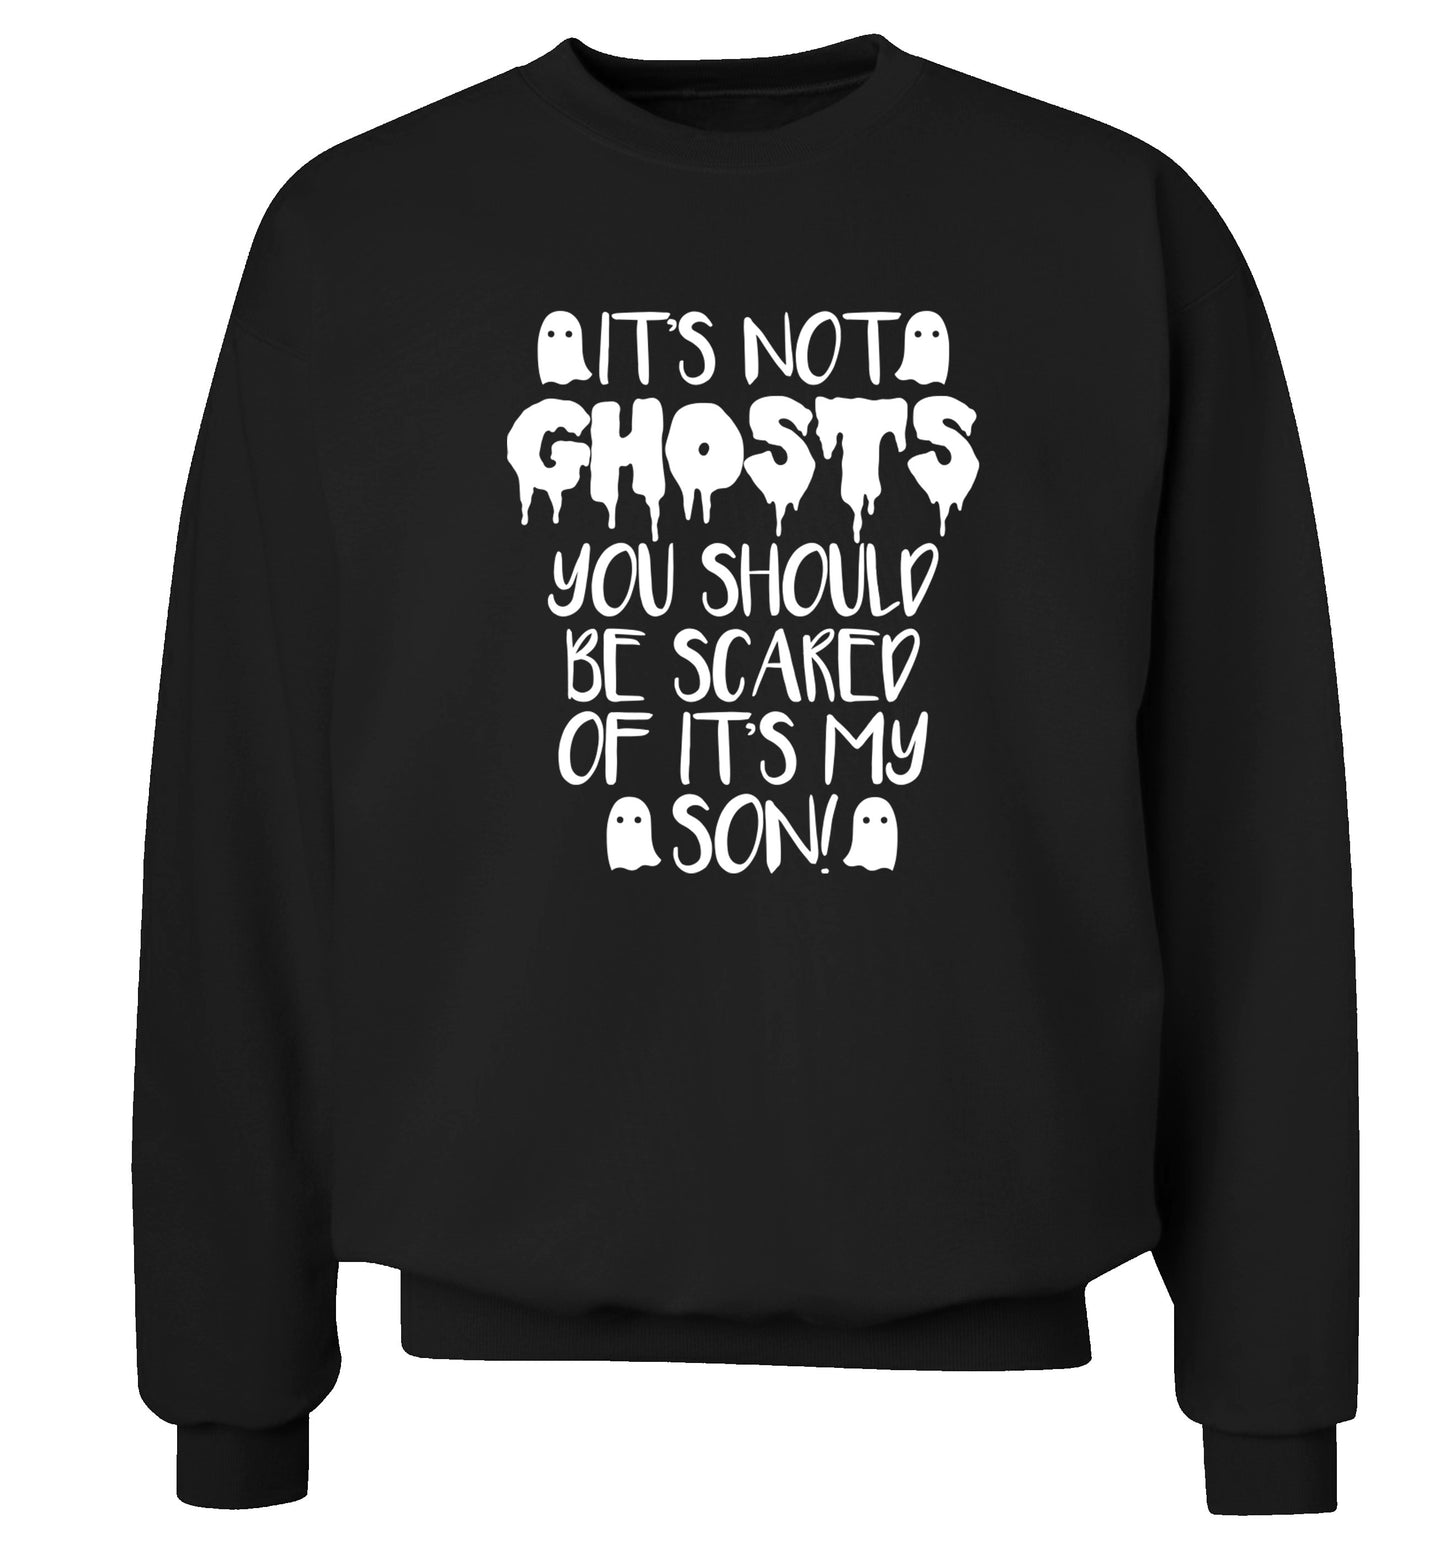 It's not ghosts you should be scared of it's my son! Adult's unisex black Sweater 2XL